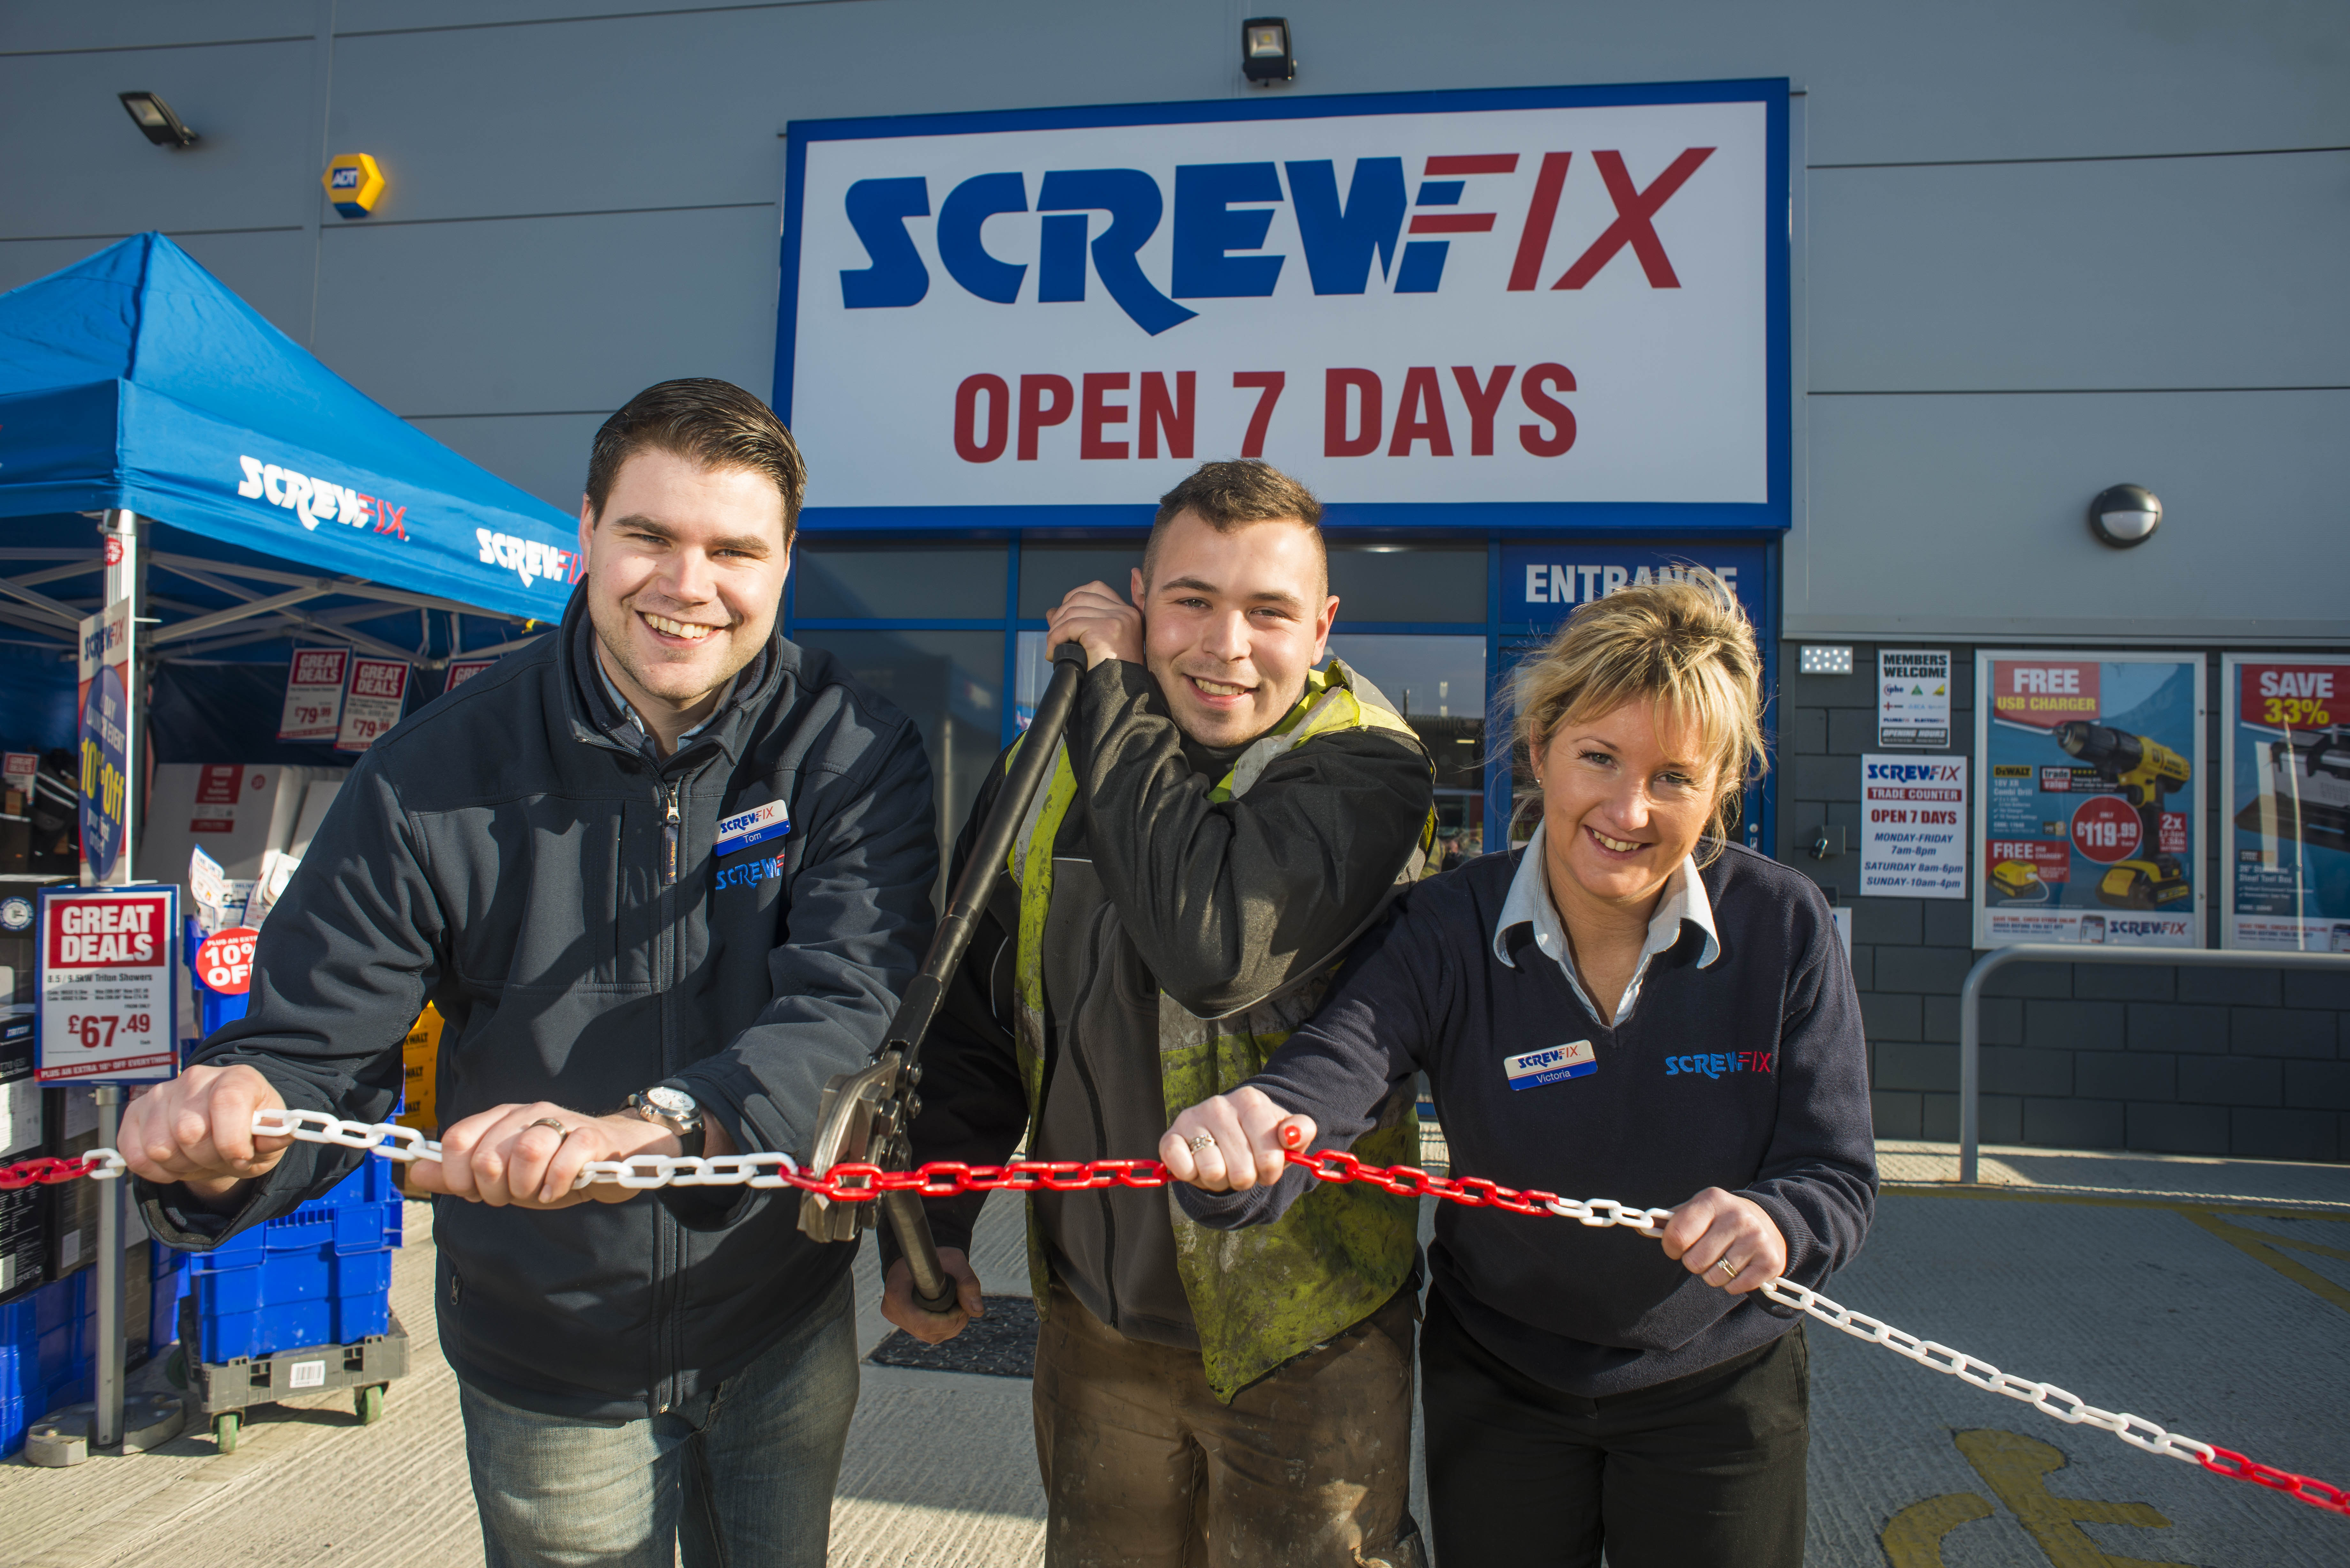 Norwich’s third Screwfix store is declared a runaway success